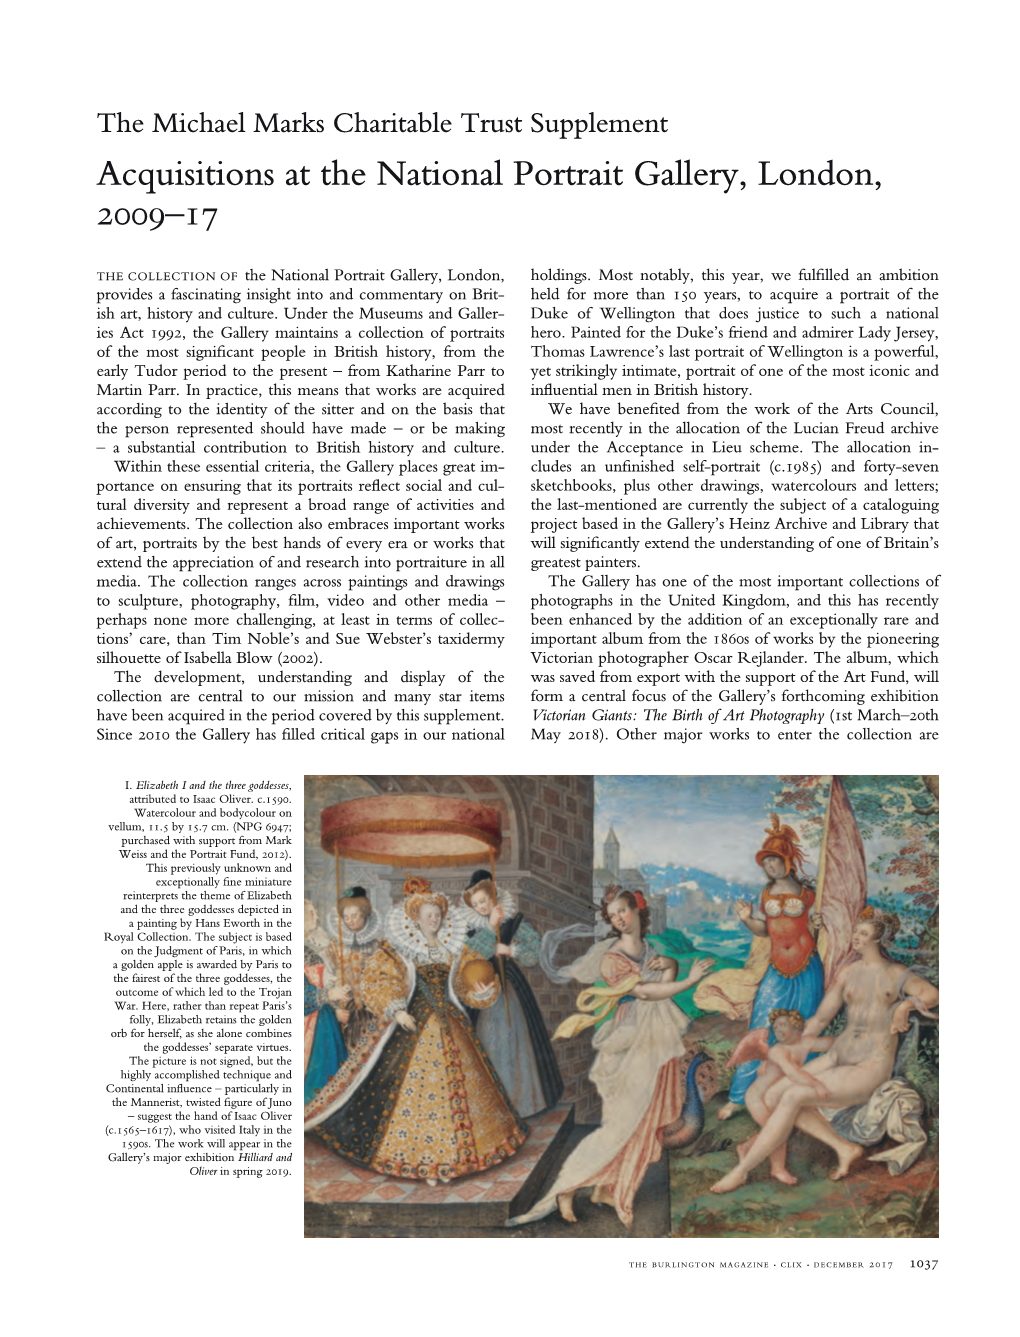 Acquisitions at the National Portrait Gallery, London, 2009–17